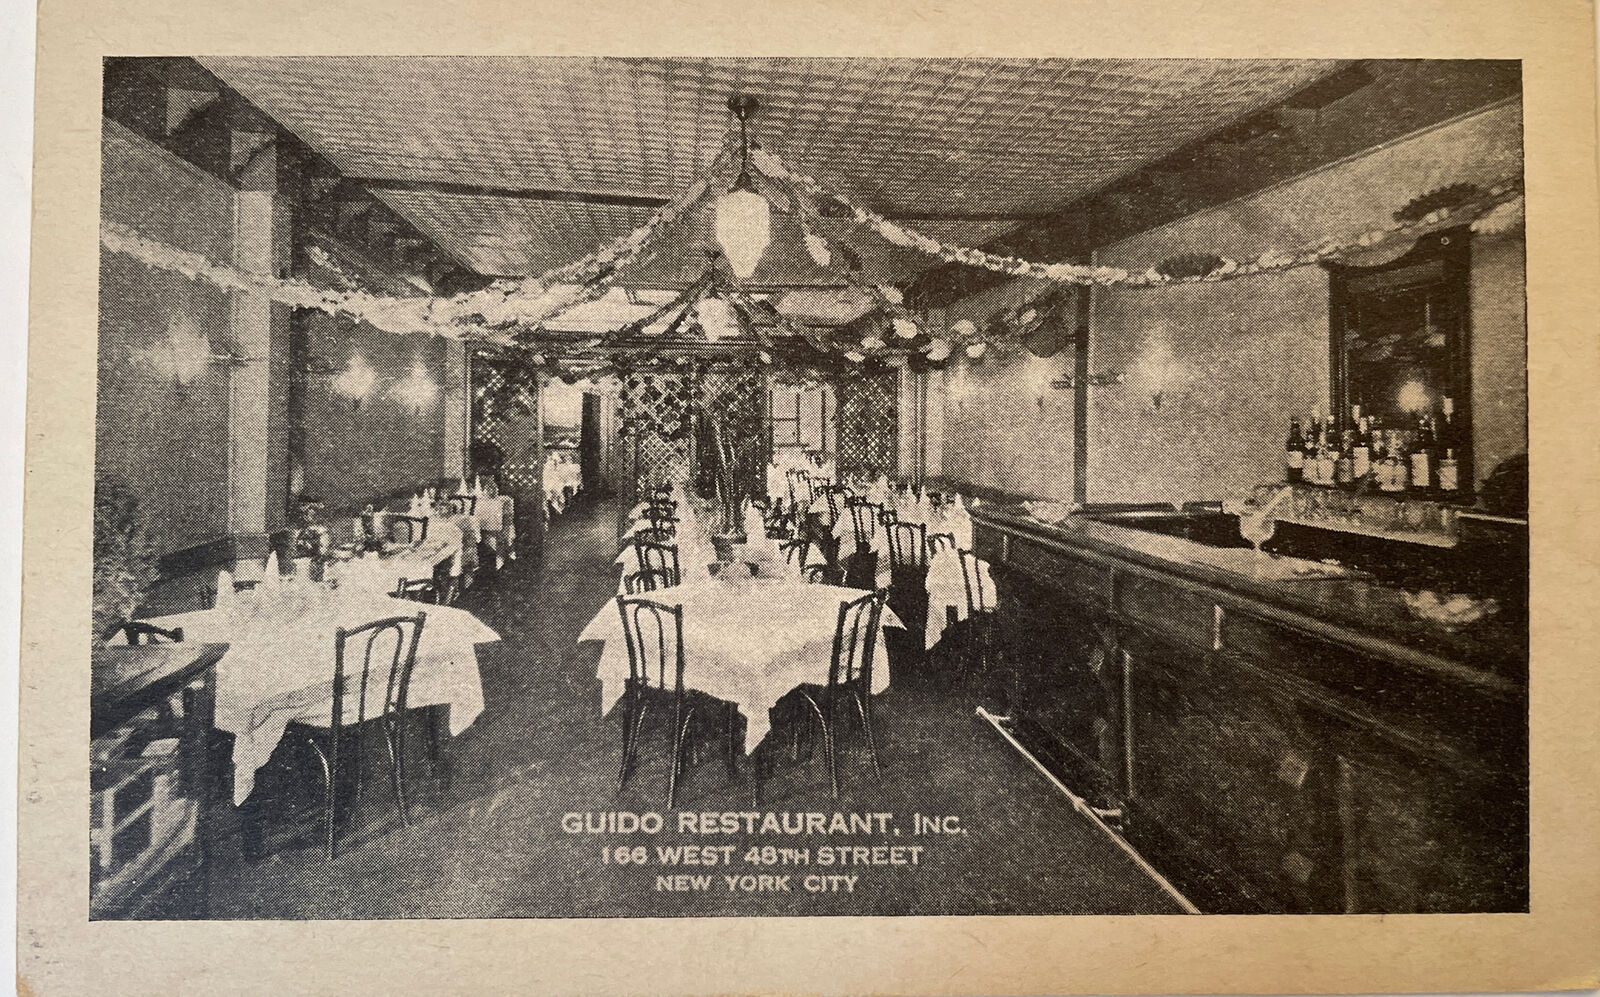 GUIDO RESTAURANT INTERIOR ADVERTISING REAL PHOTO RPPC WEST 48TH ST.NYC